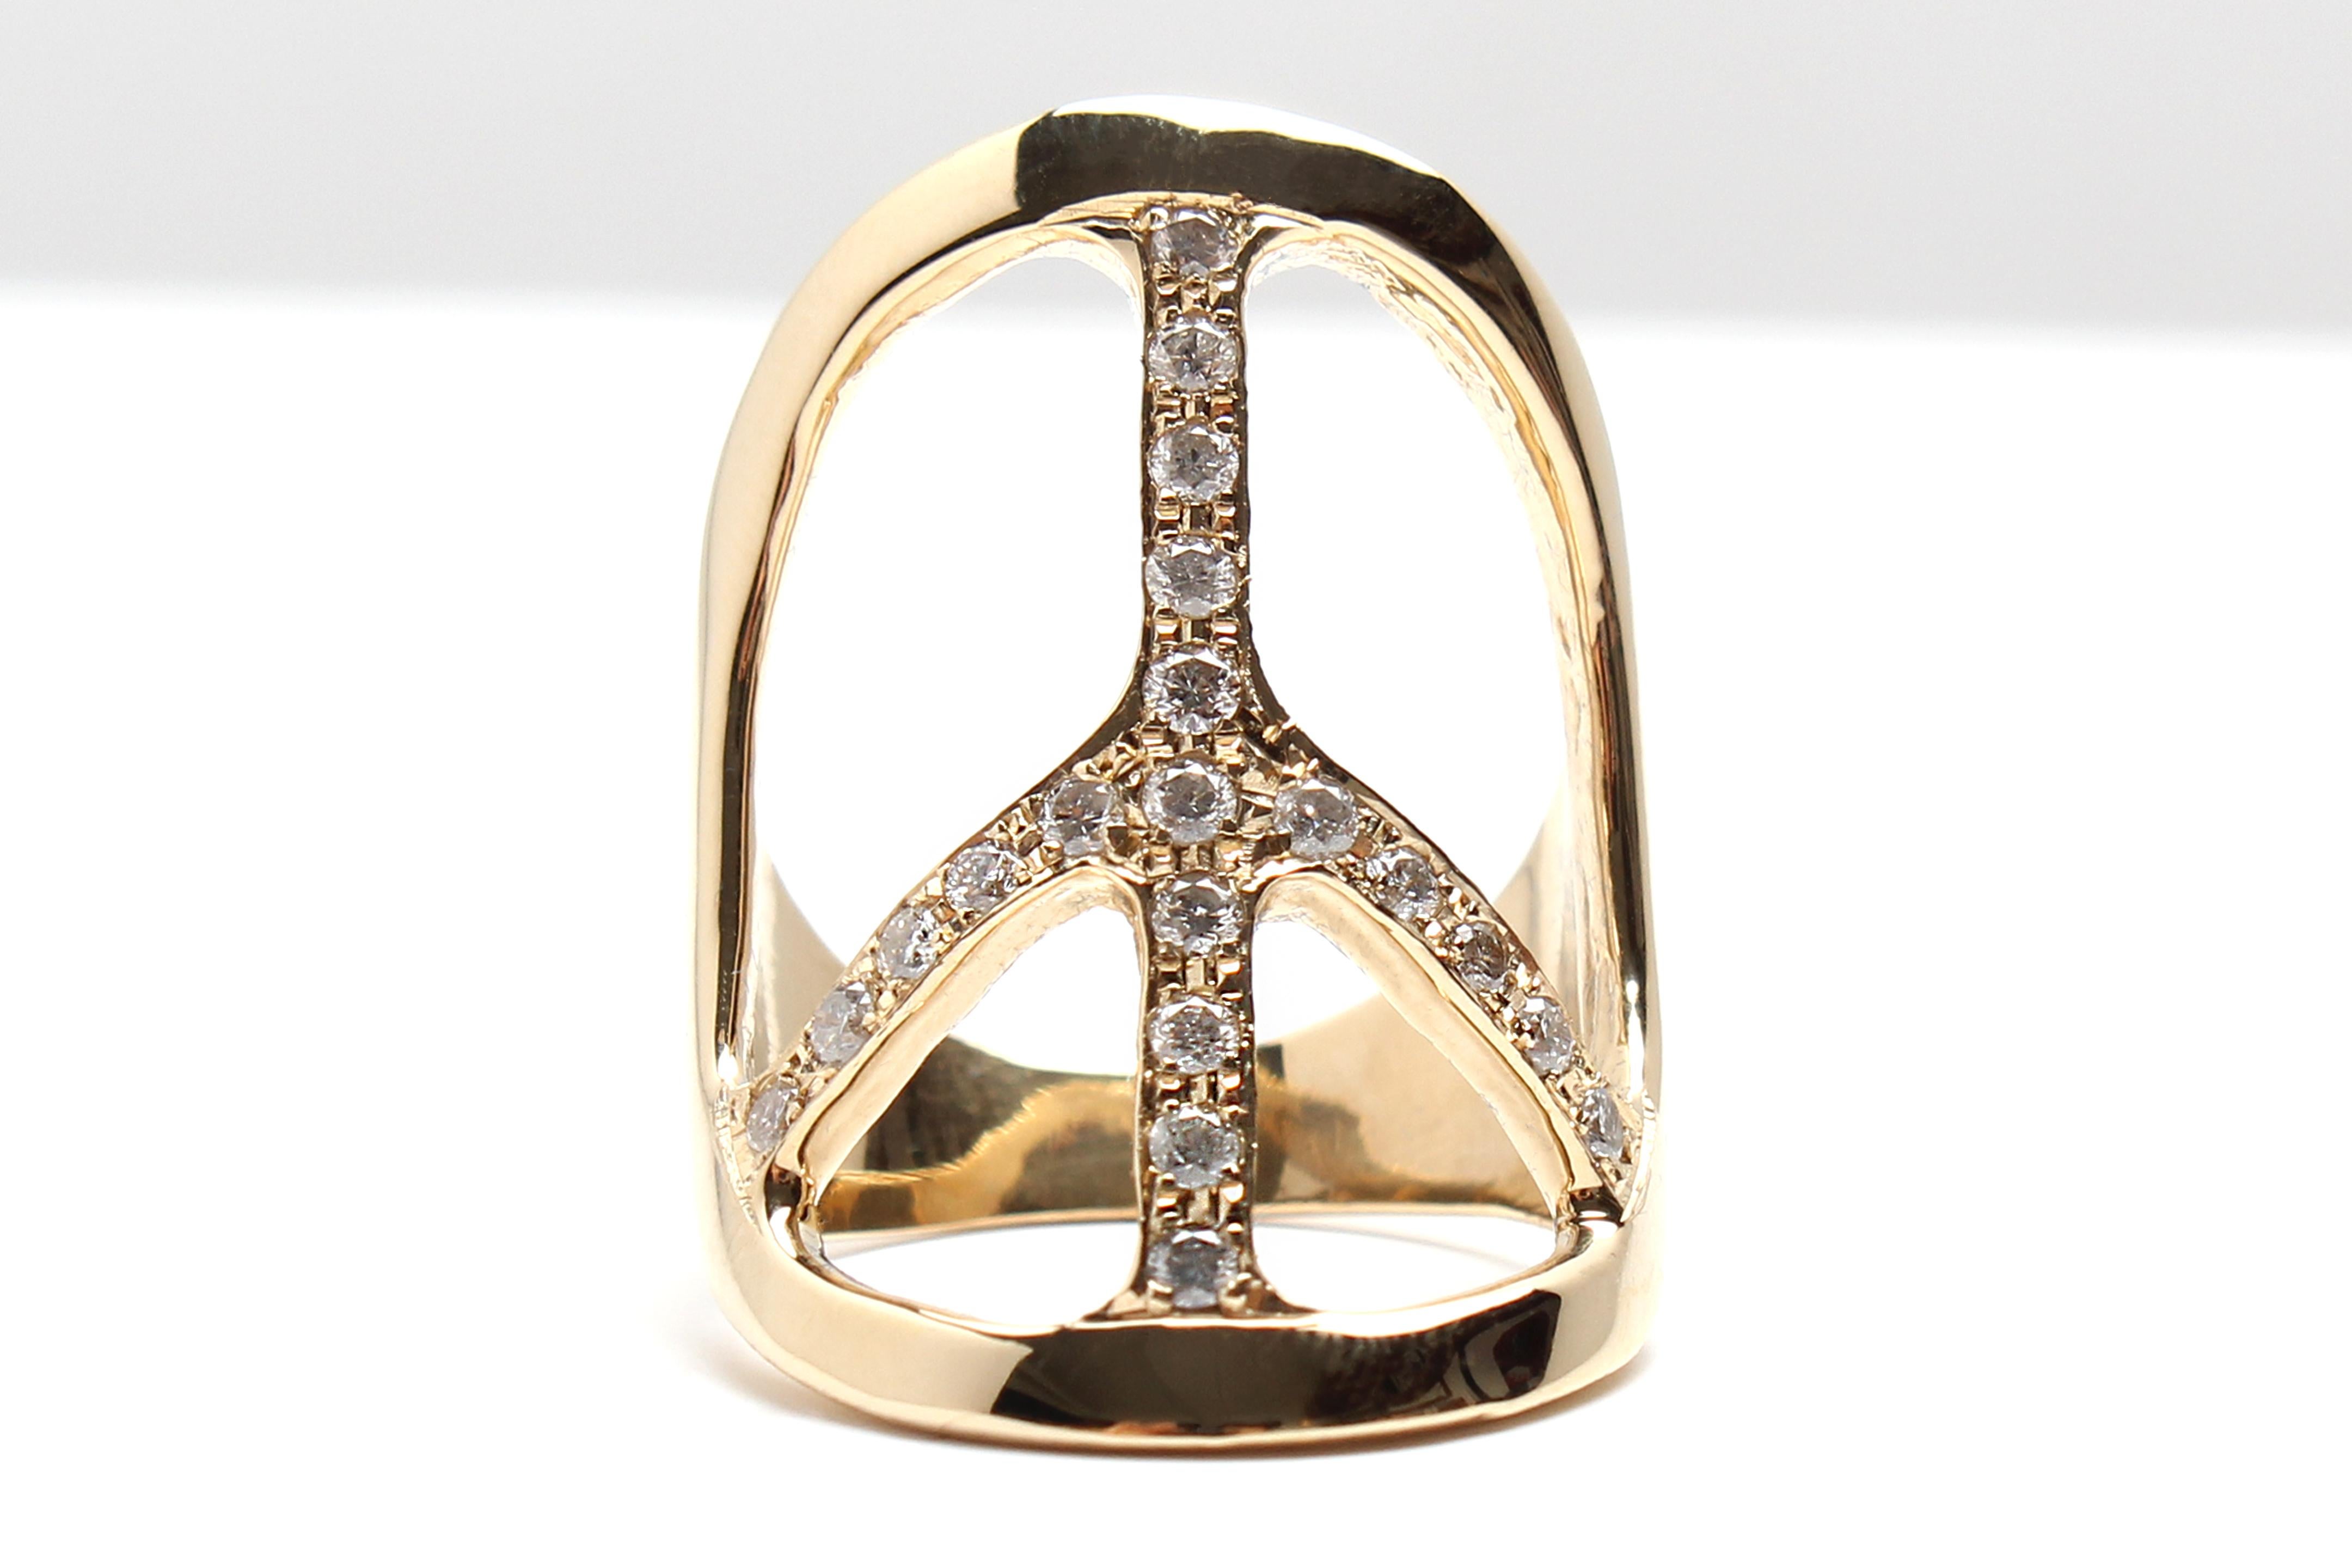 Clarissa Bronfman Signature Solid 14 Karat Gold Diamond Peace Ring In New Condition For Sale In New York, NY